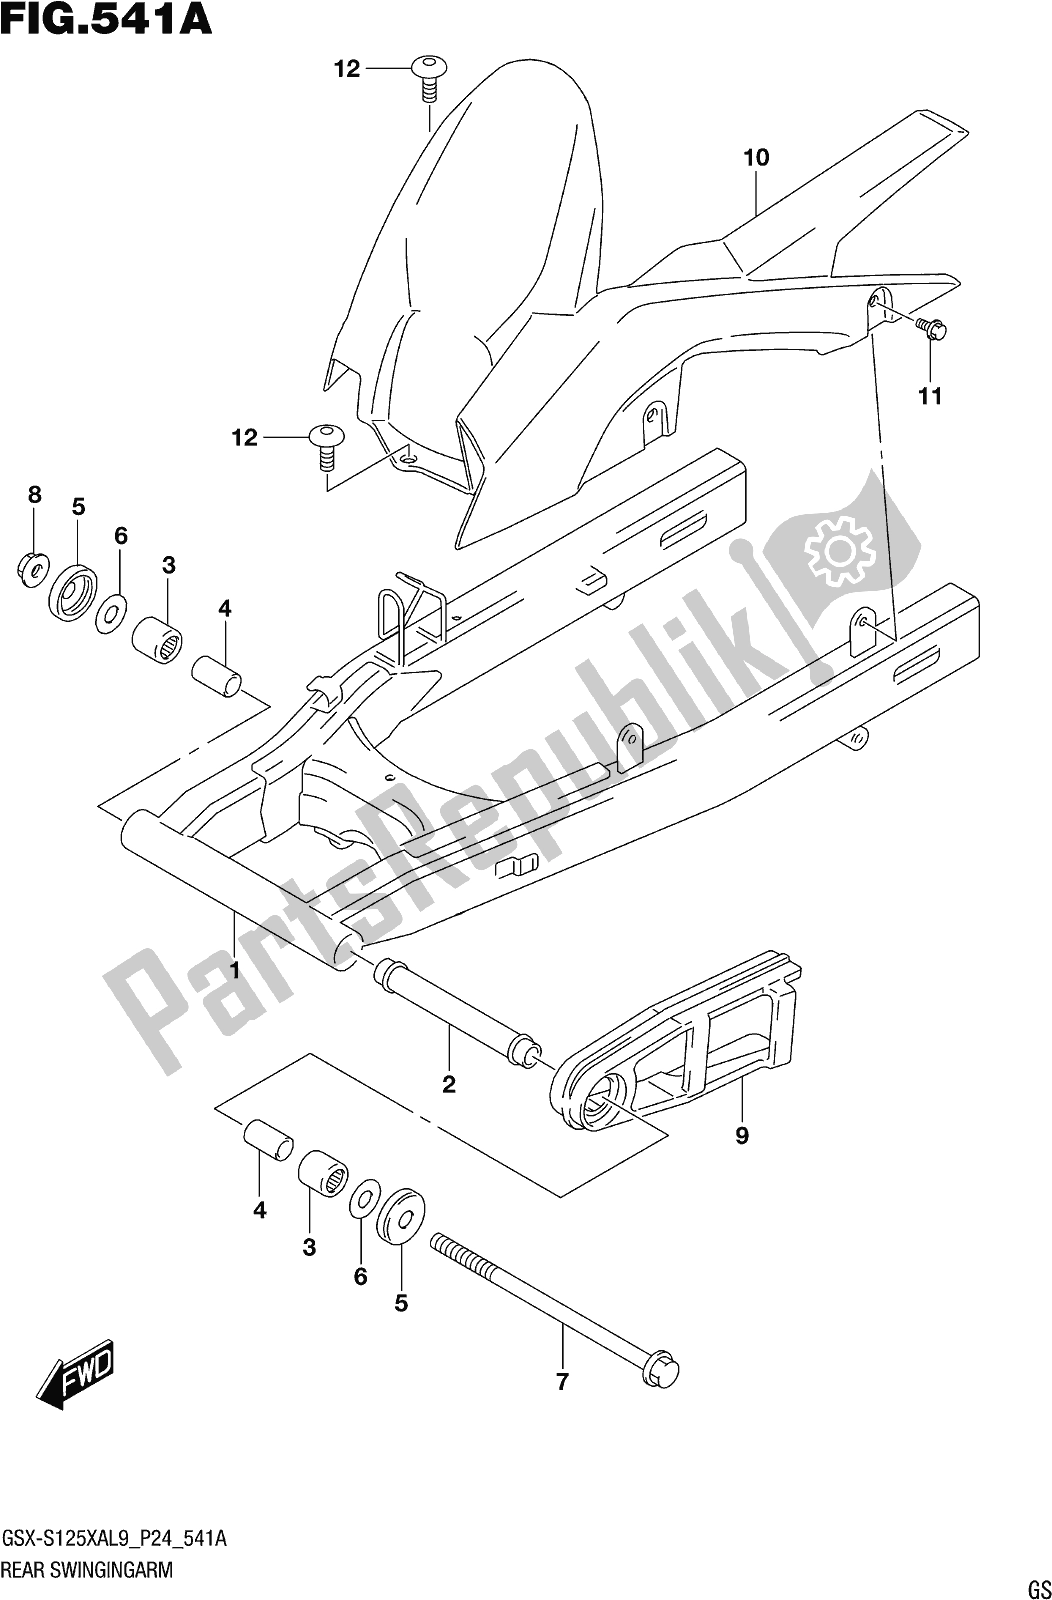 All parts for the Fig. 541a Rear Swingingarm of the Suzuki Gsx-s 125 XA 2019